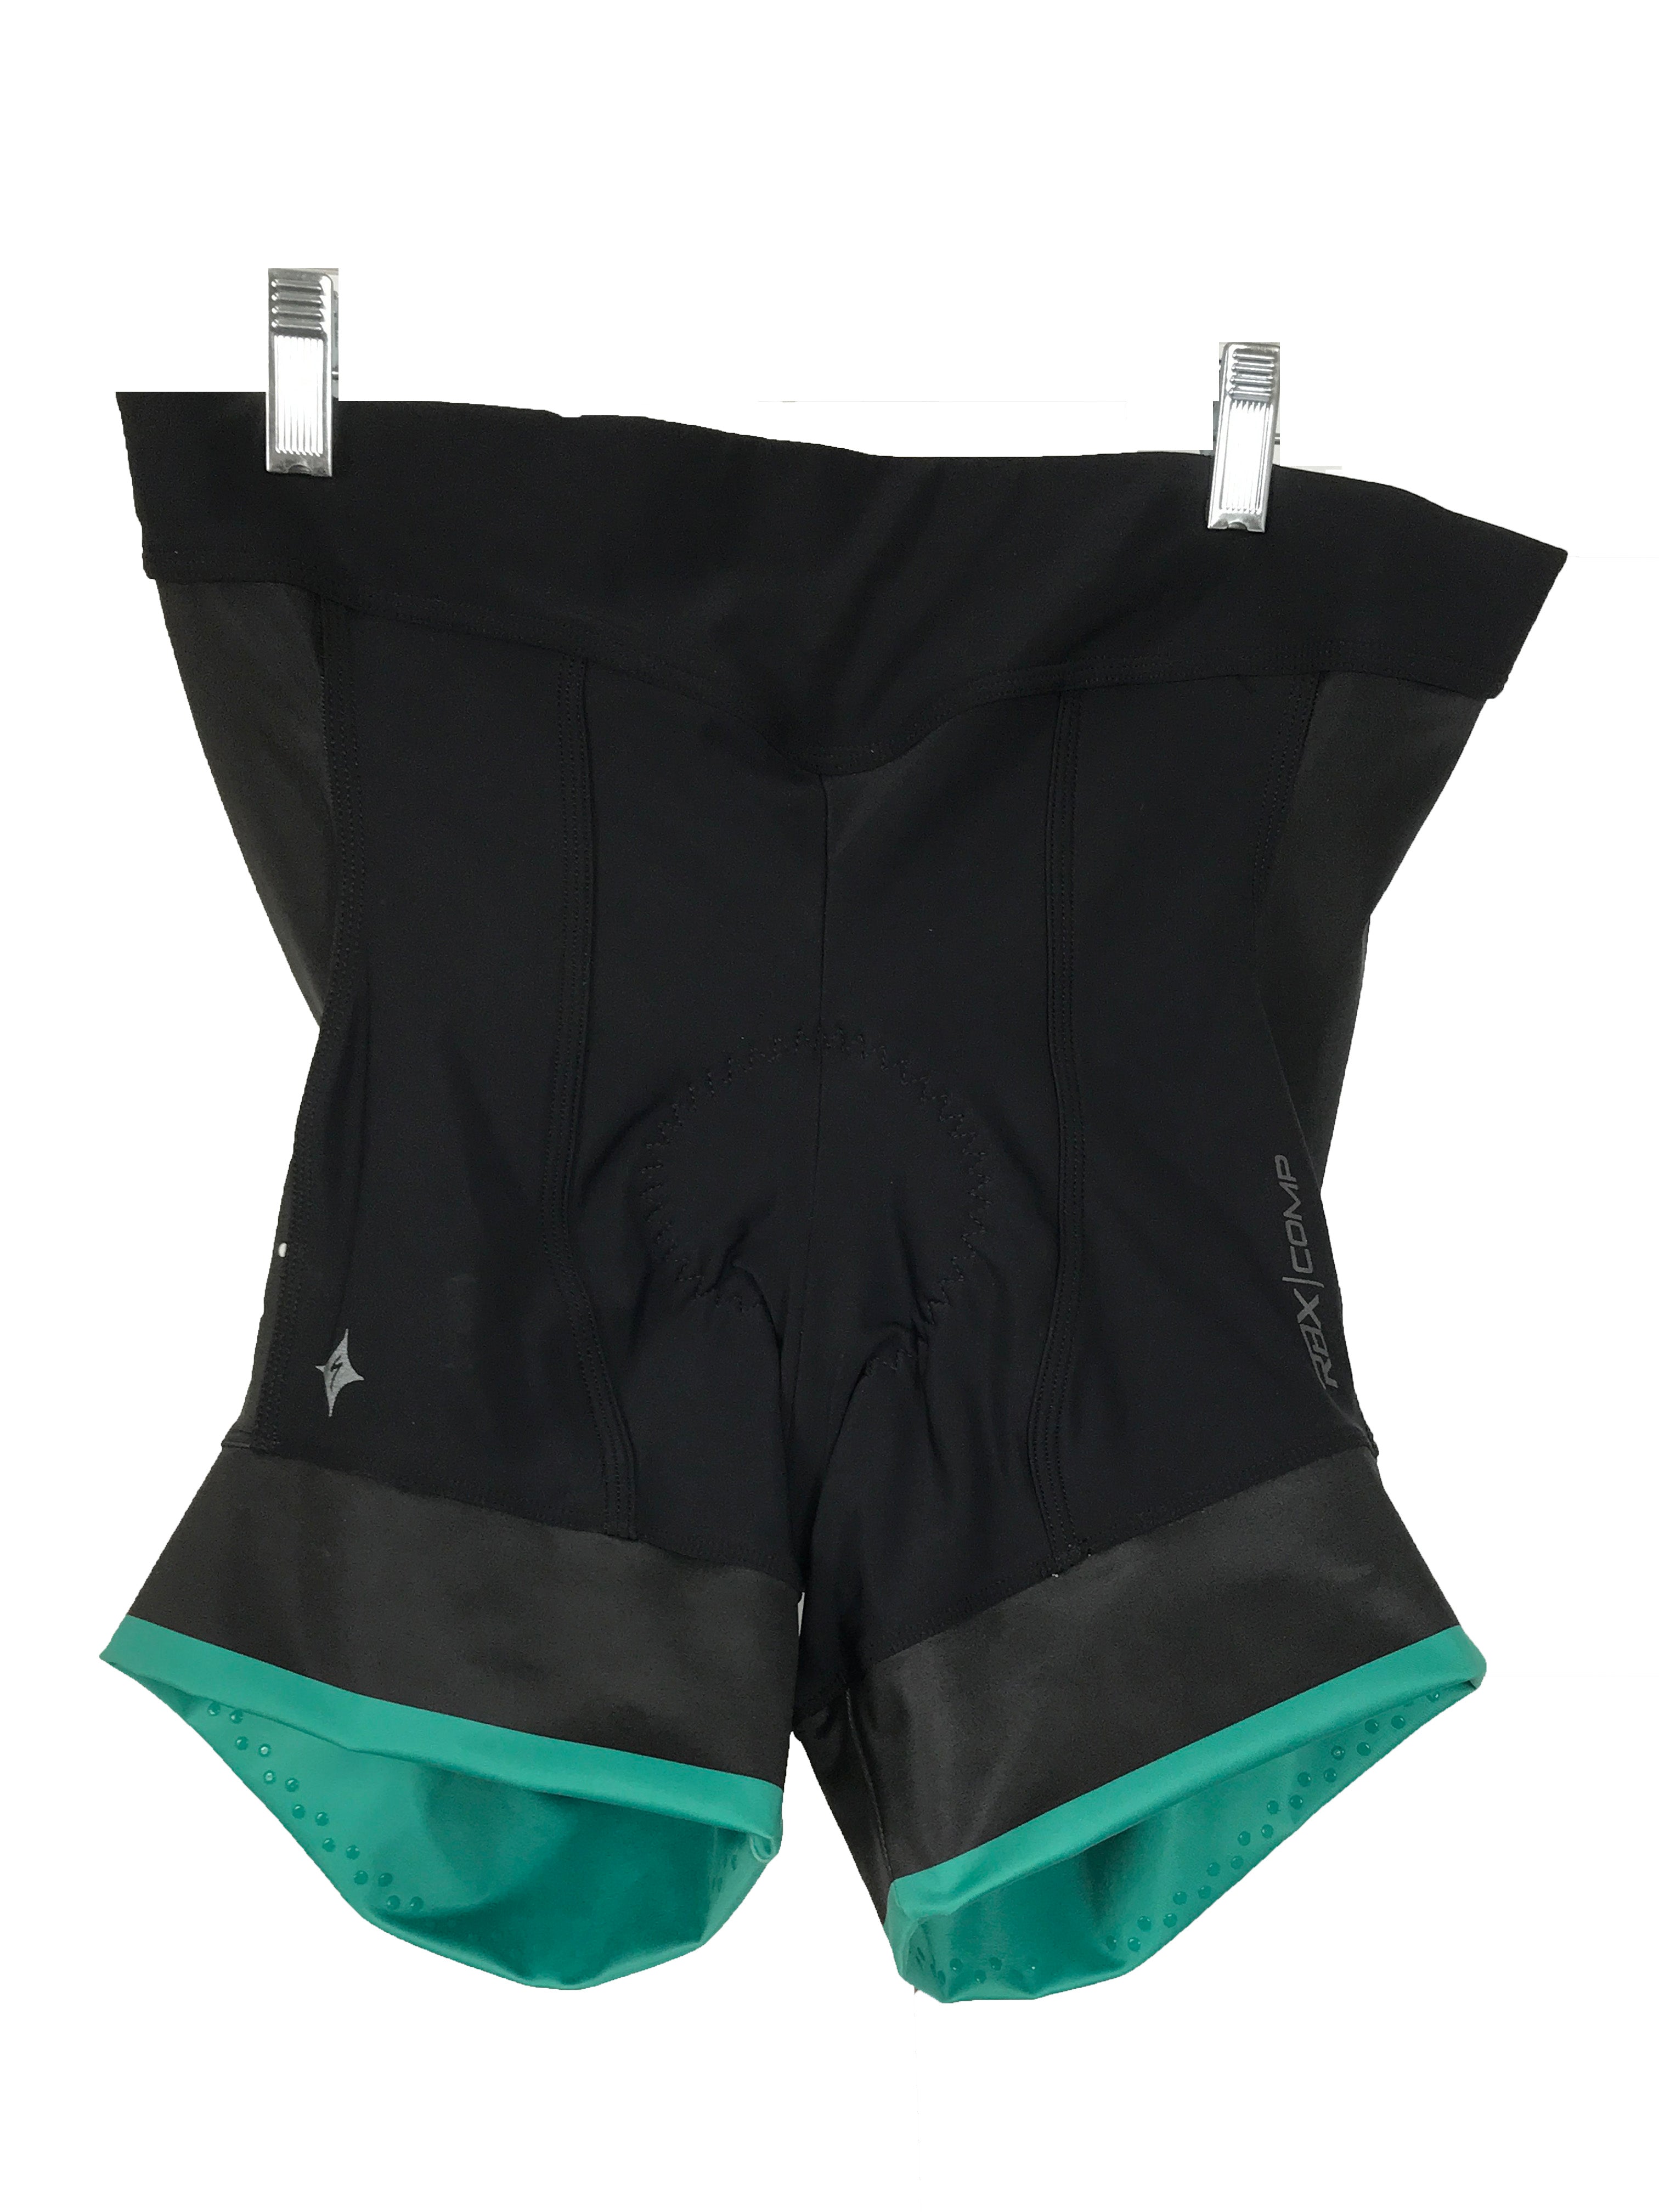 Specialized RBX Comp Shorty Black and Green Shorts with Chamois Women's Size L NWT